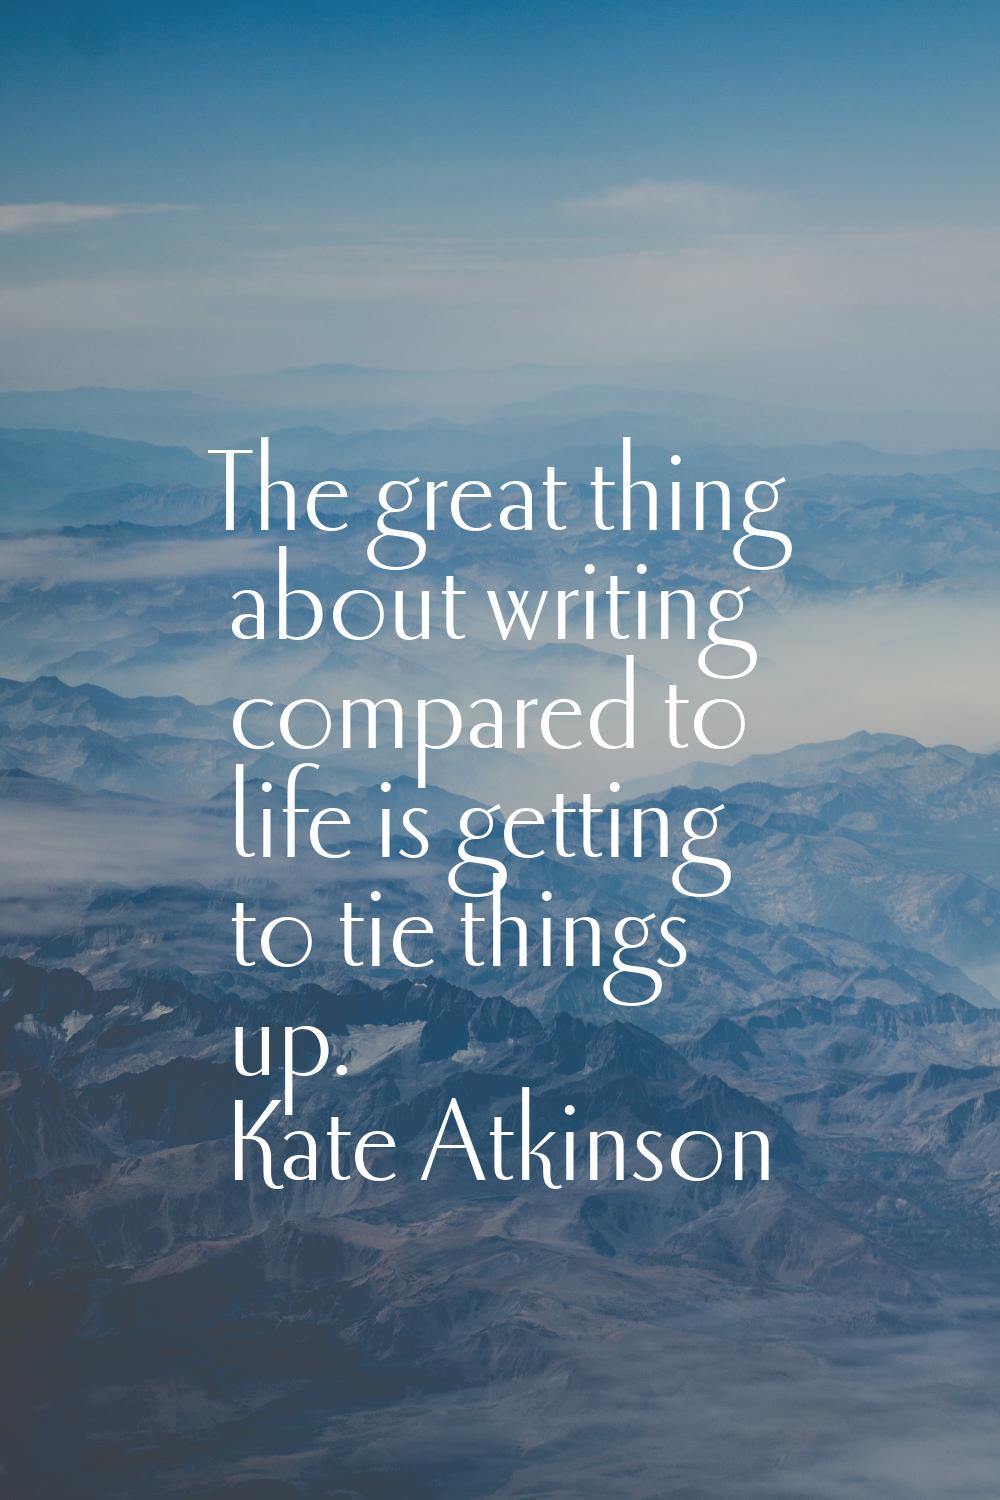 The great thing about writing compared to life is getting to tie things up.